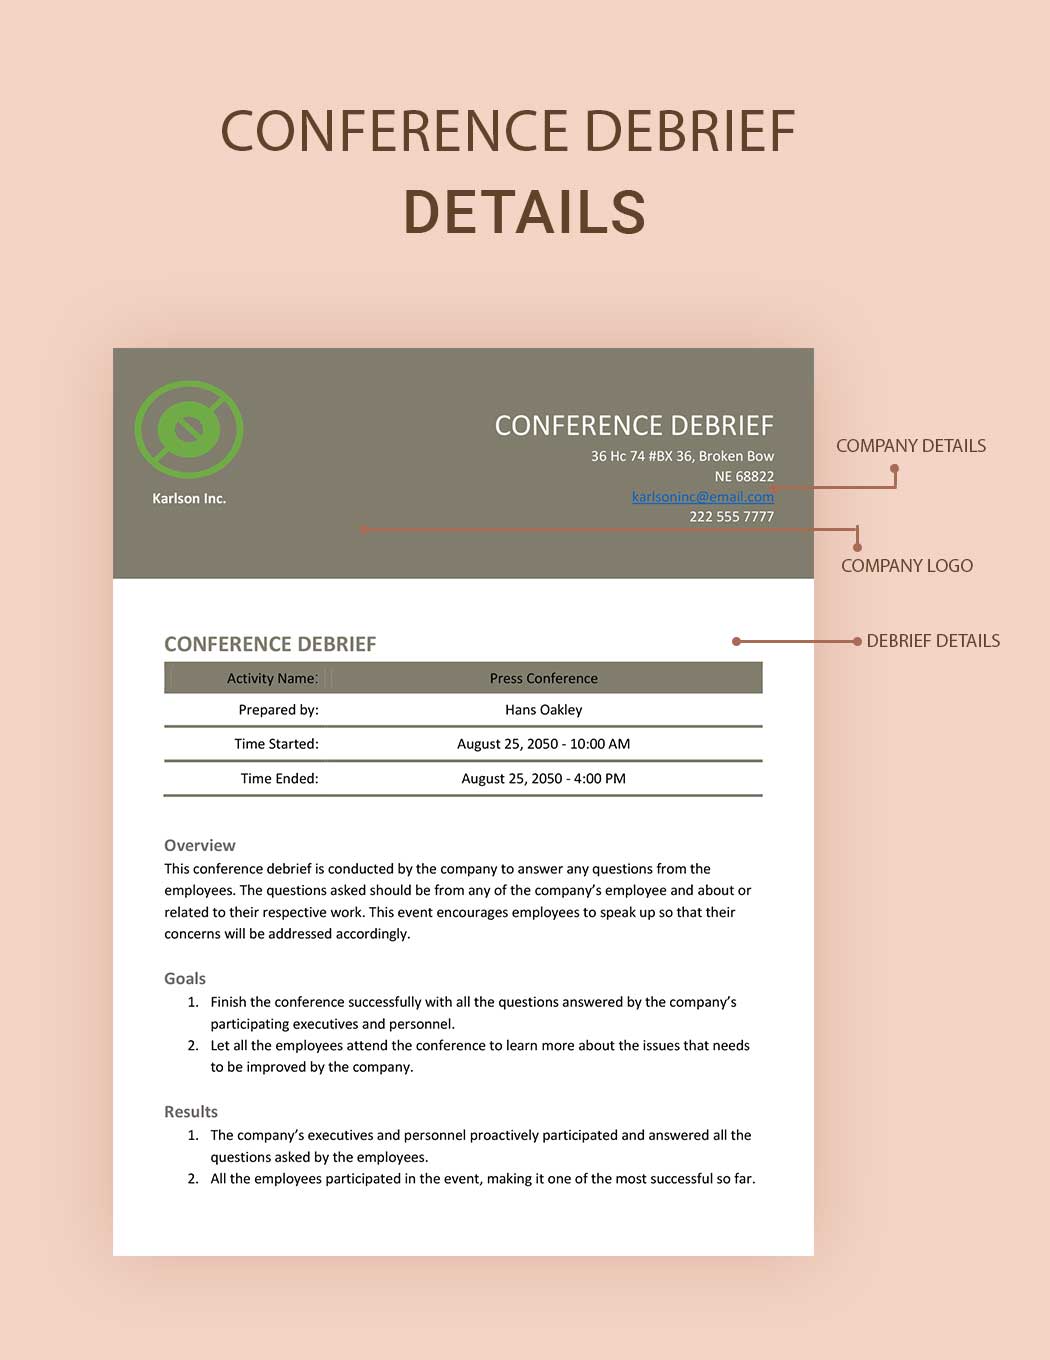 Conference Debrief Template Download in Word, Google Docs